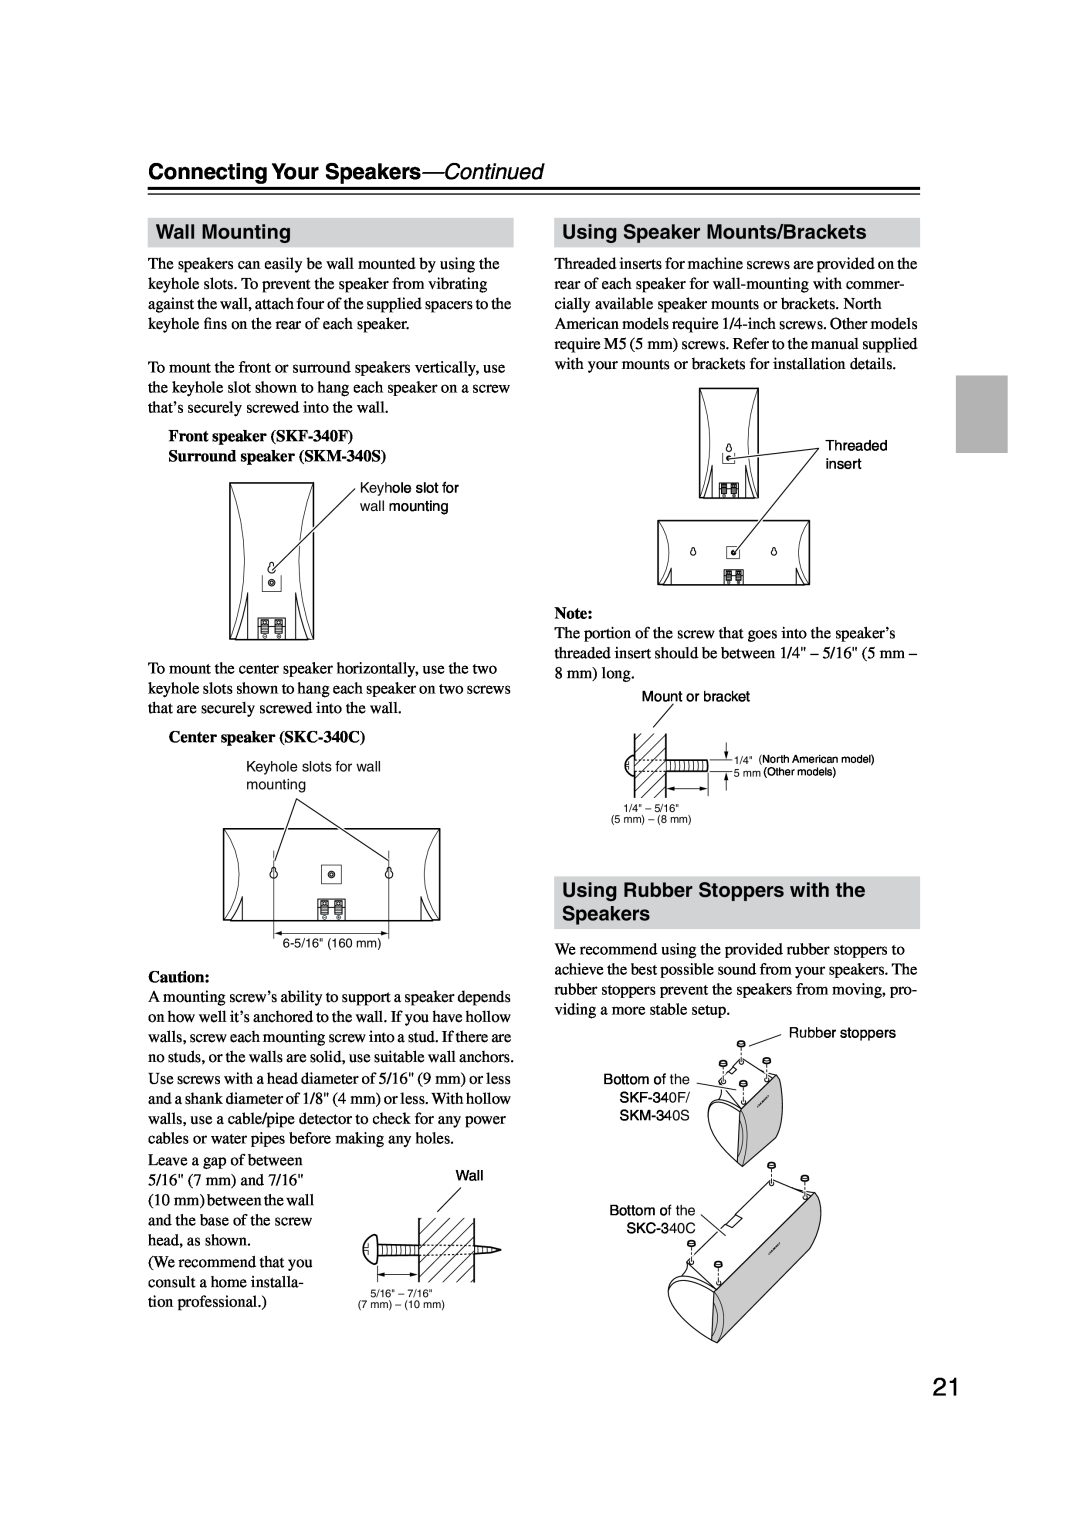 Onkyo HT-S590 instruction manual Connecting Your Speakers-Continued, Wall Mounting, Using Speaker Mounts/Brackets 